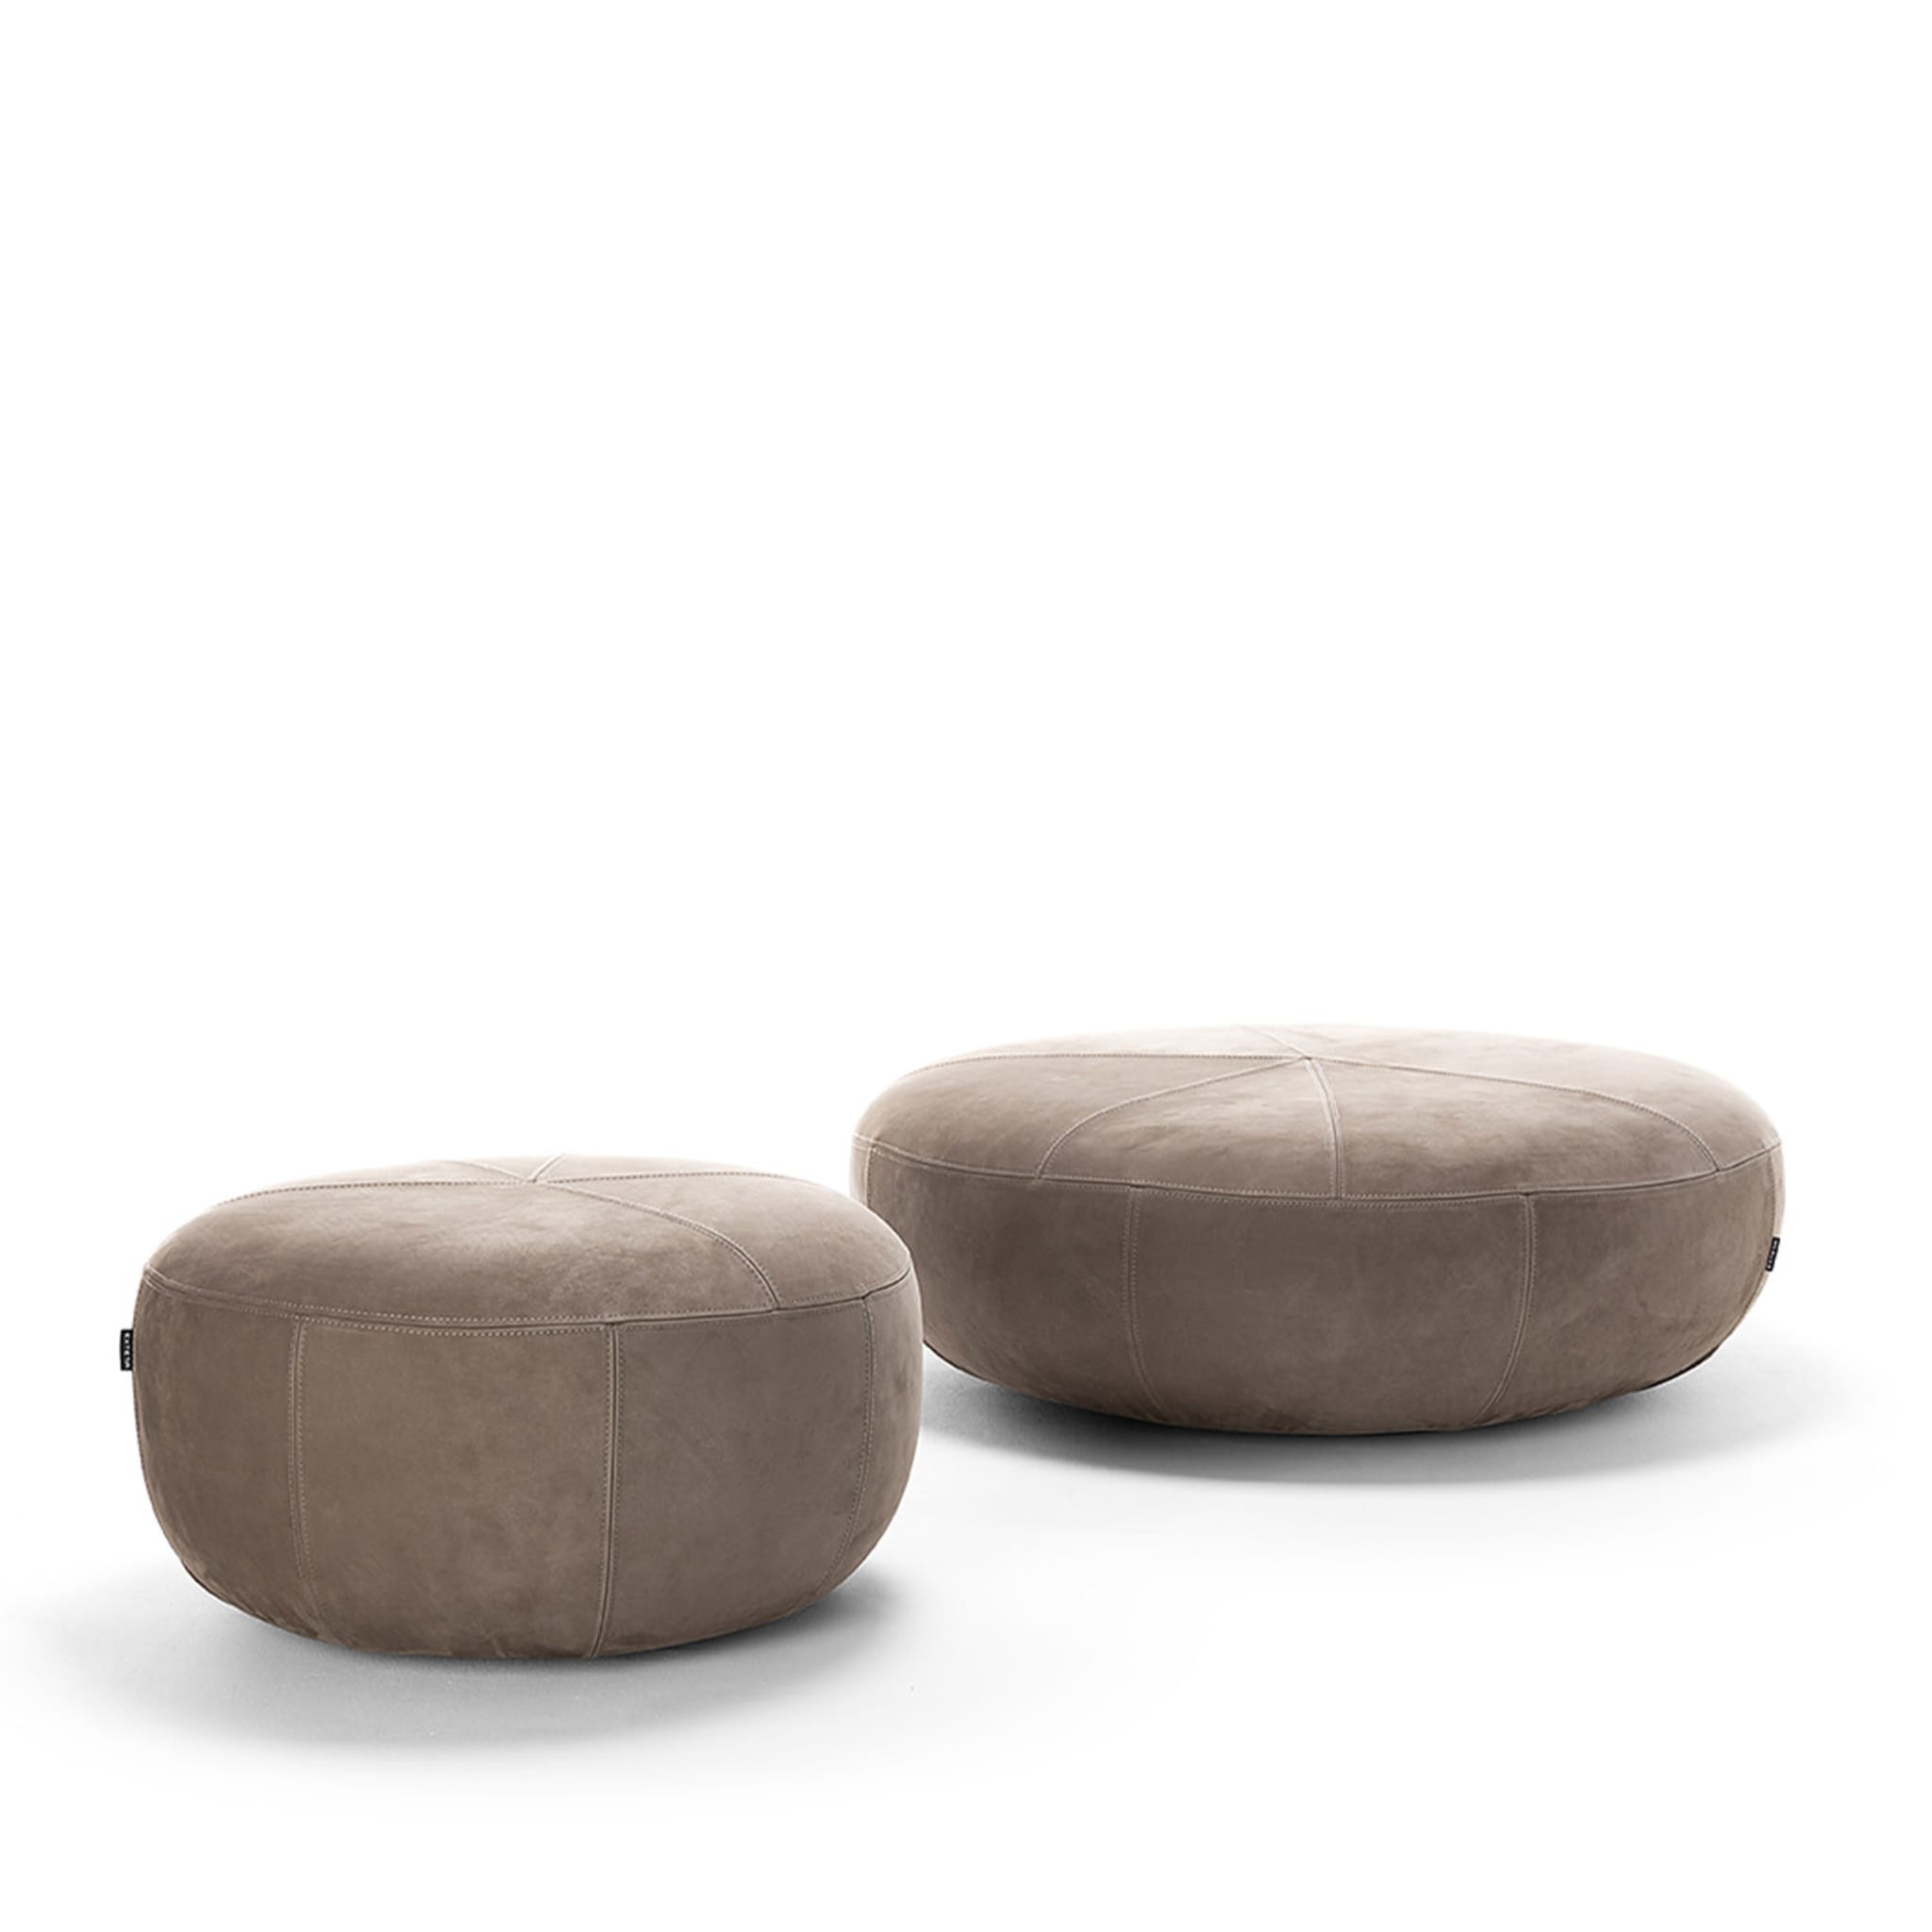 10TH Clove Large Gray Pouf by Massimo Castagna - Alternative view 4